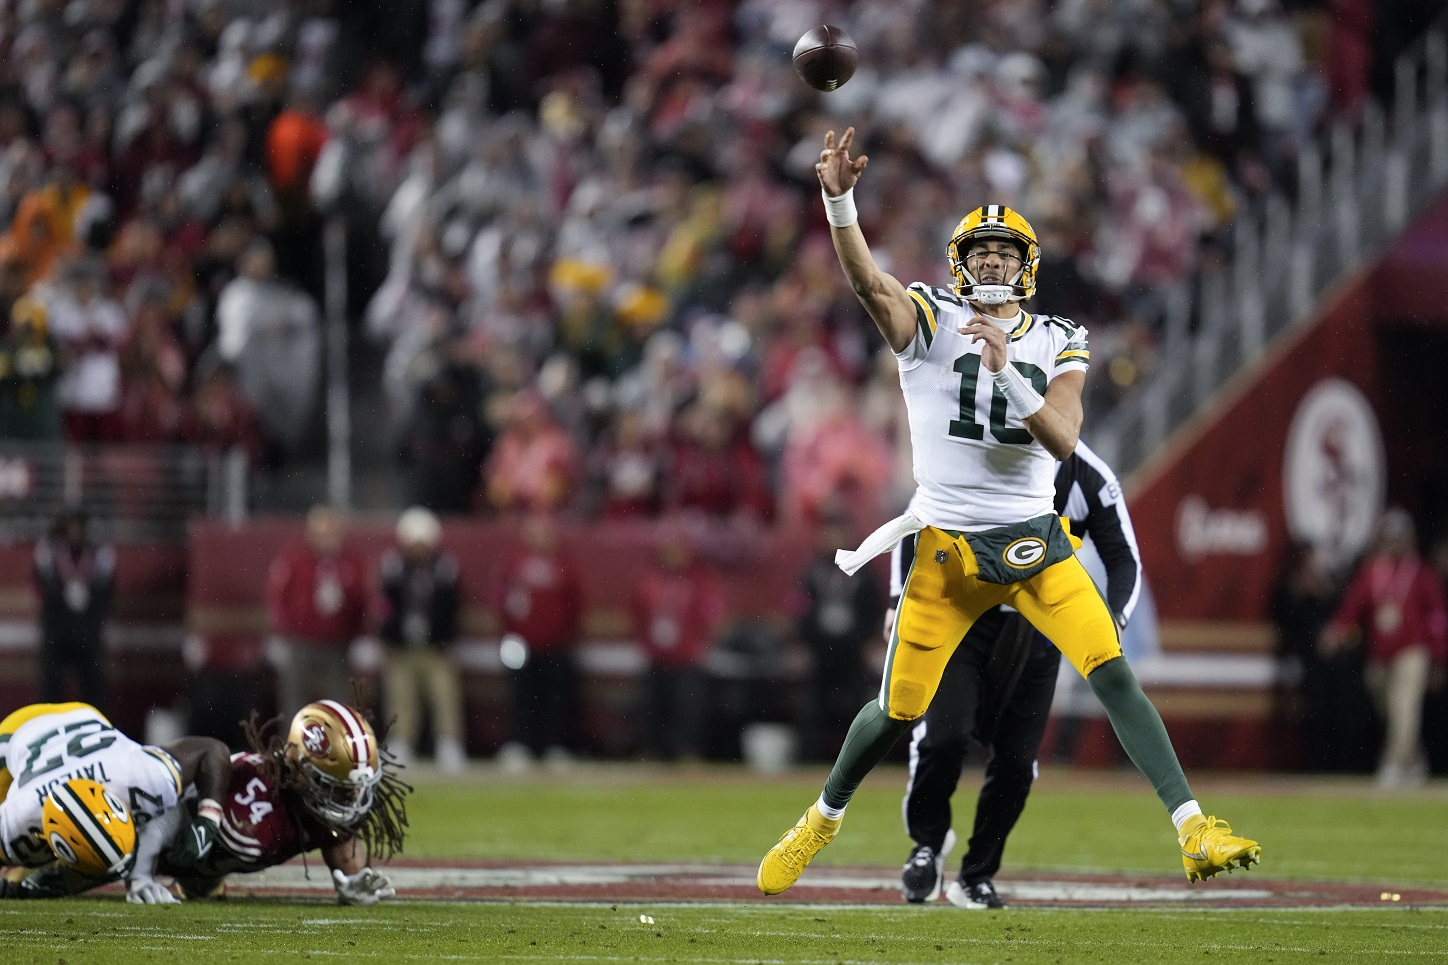 Packers will face Eagles in Brazil in Friday night season opener